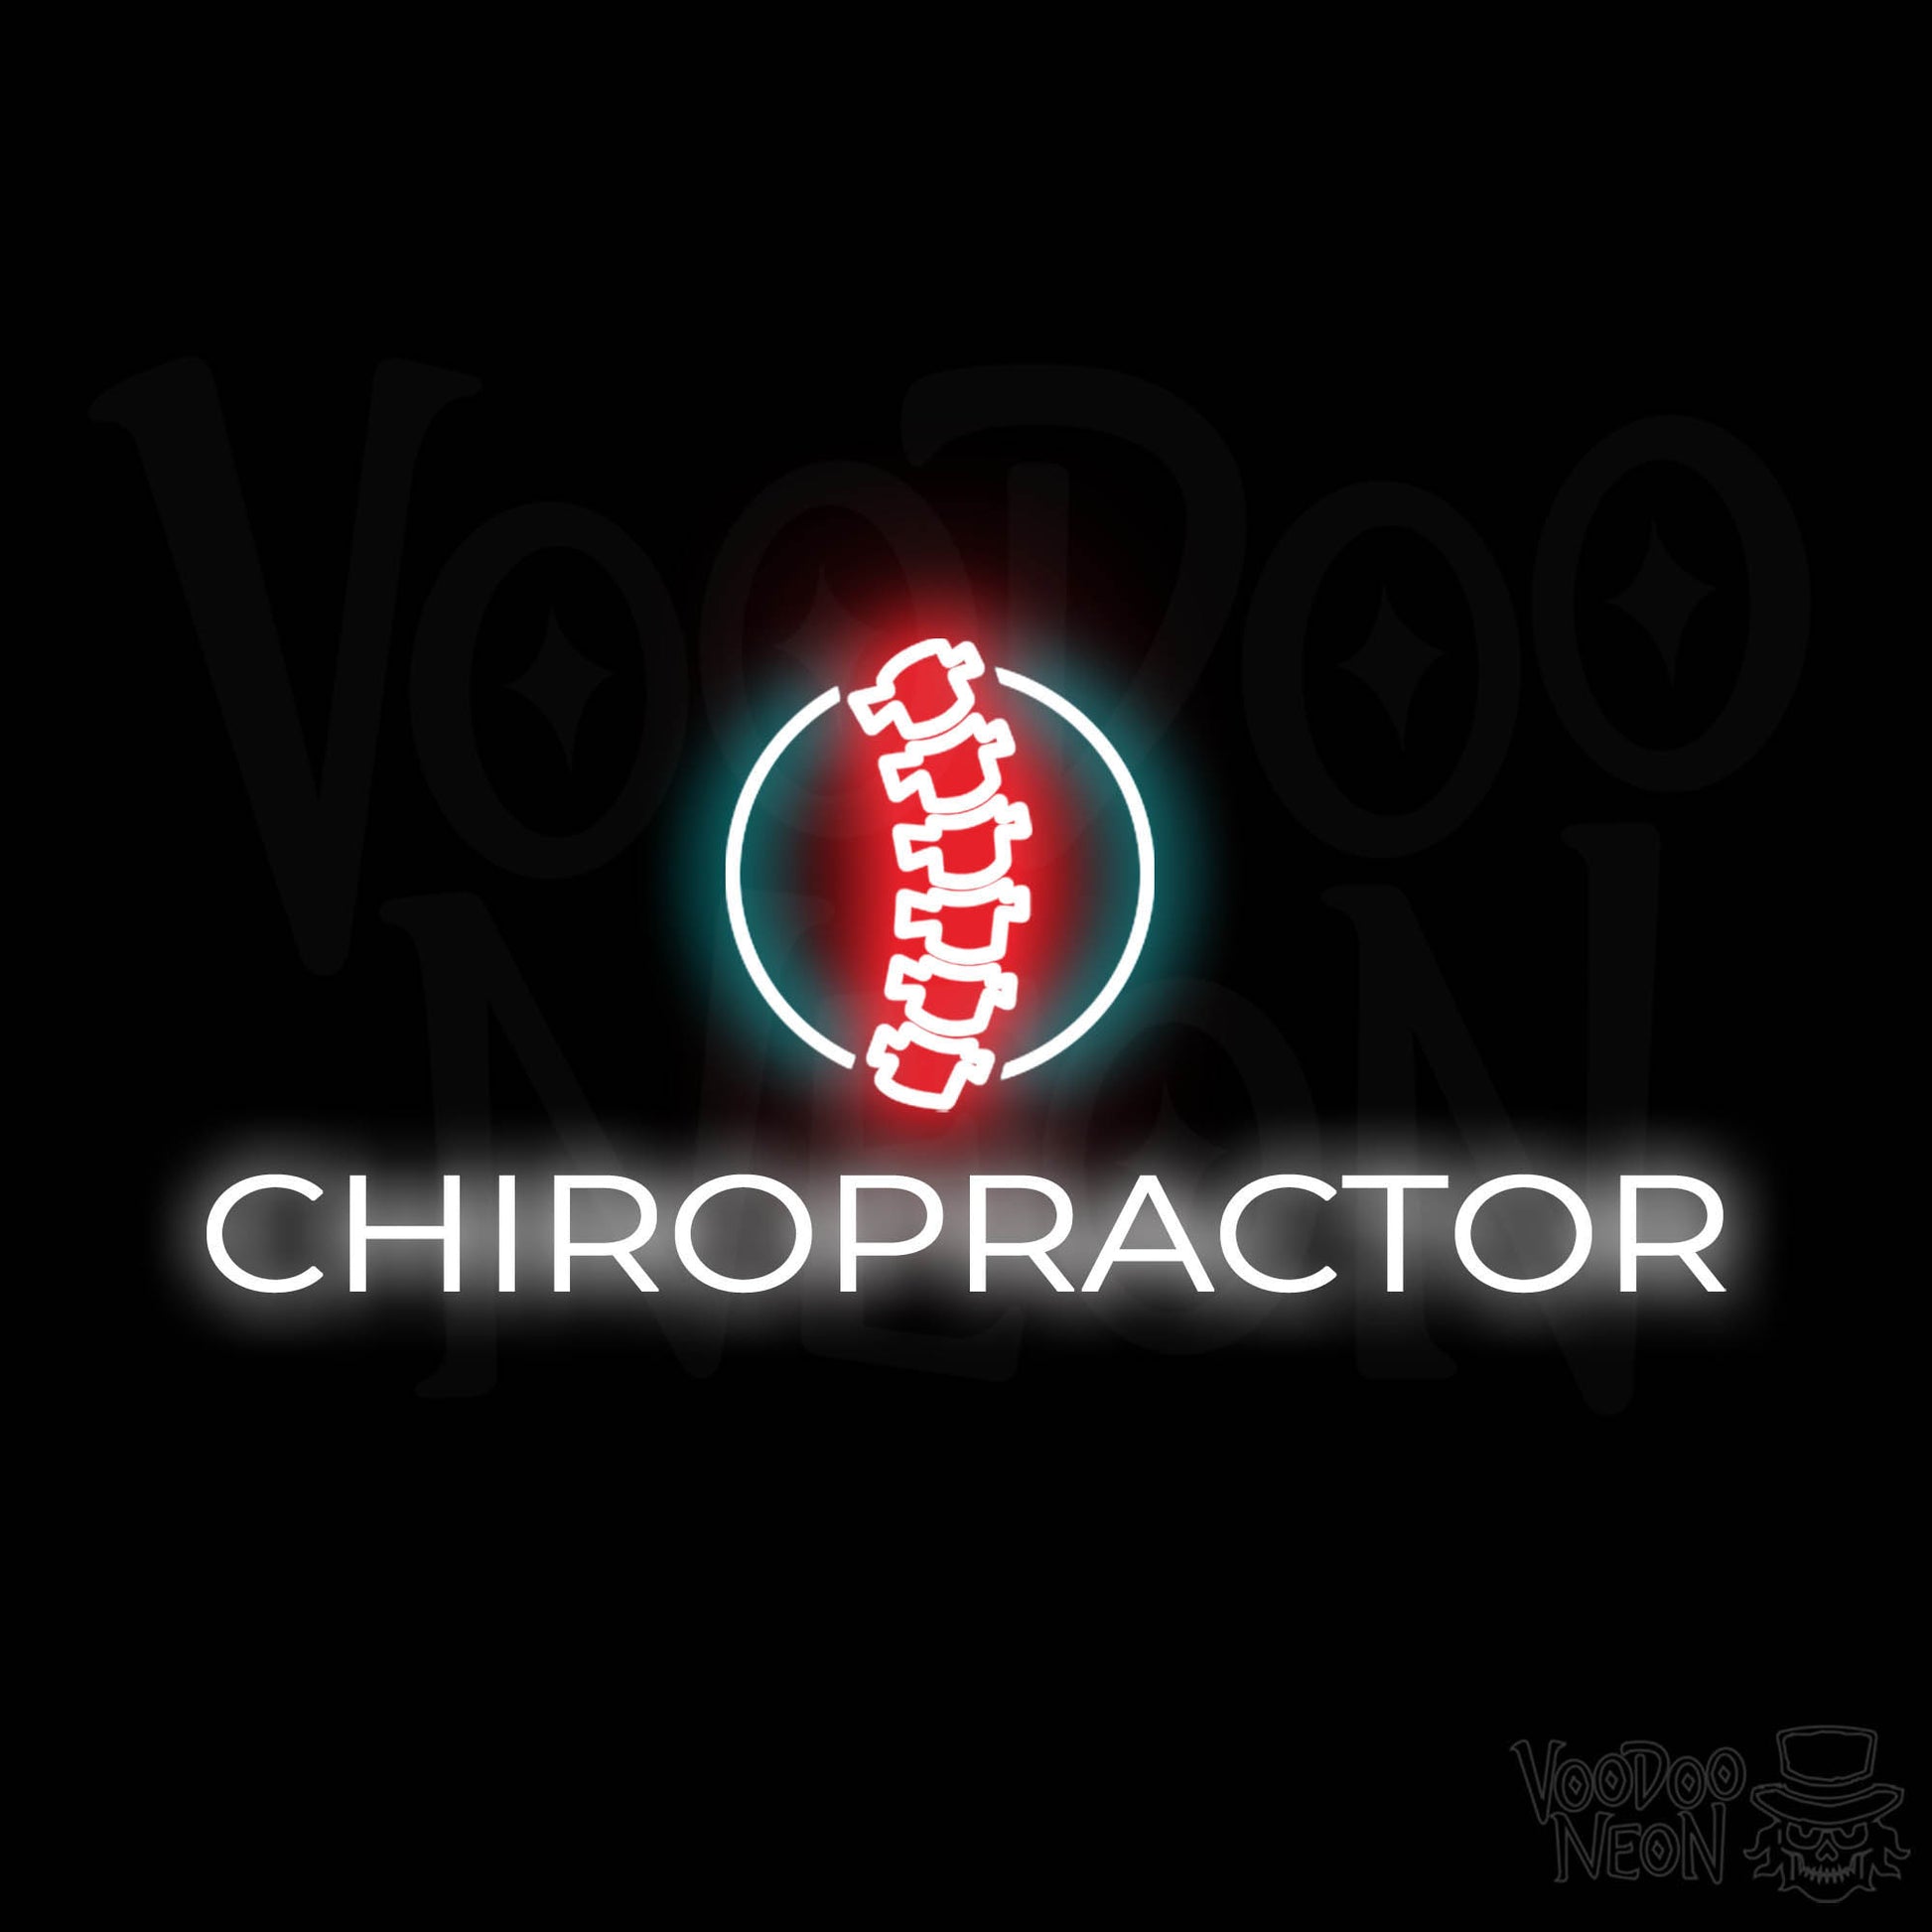 Chiropractor LED Neon - Multi-Color